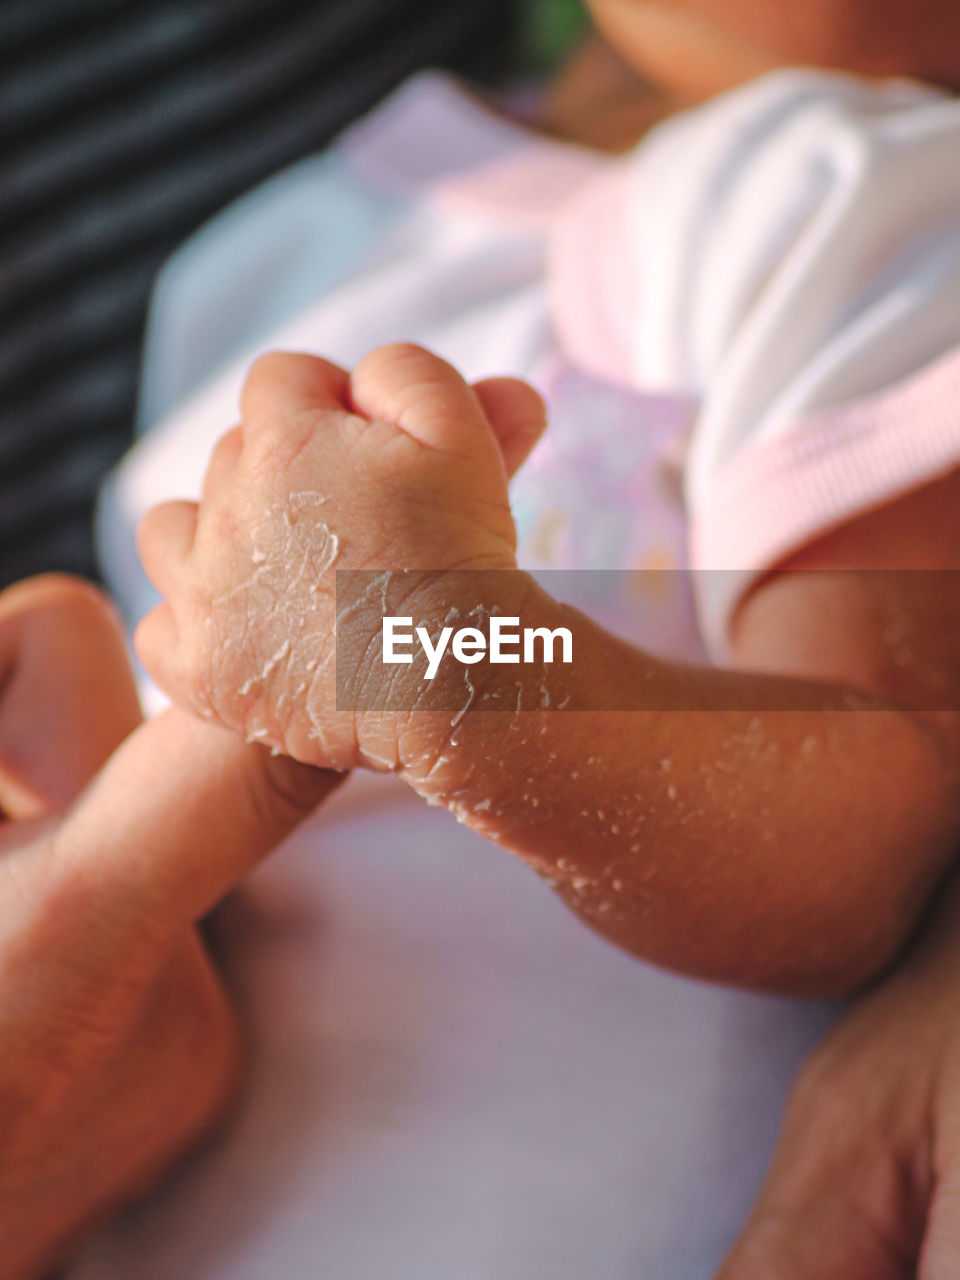 Close-up of baby holding person finger